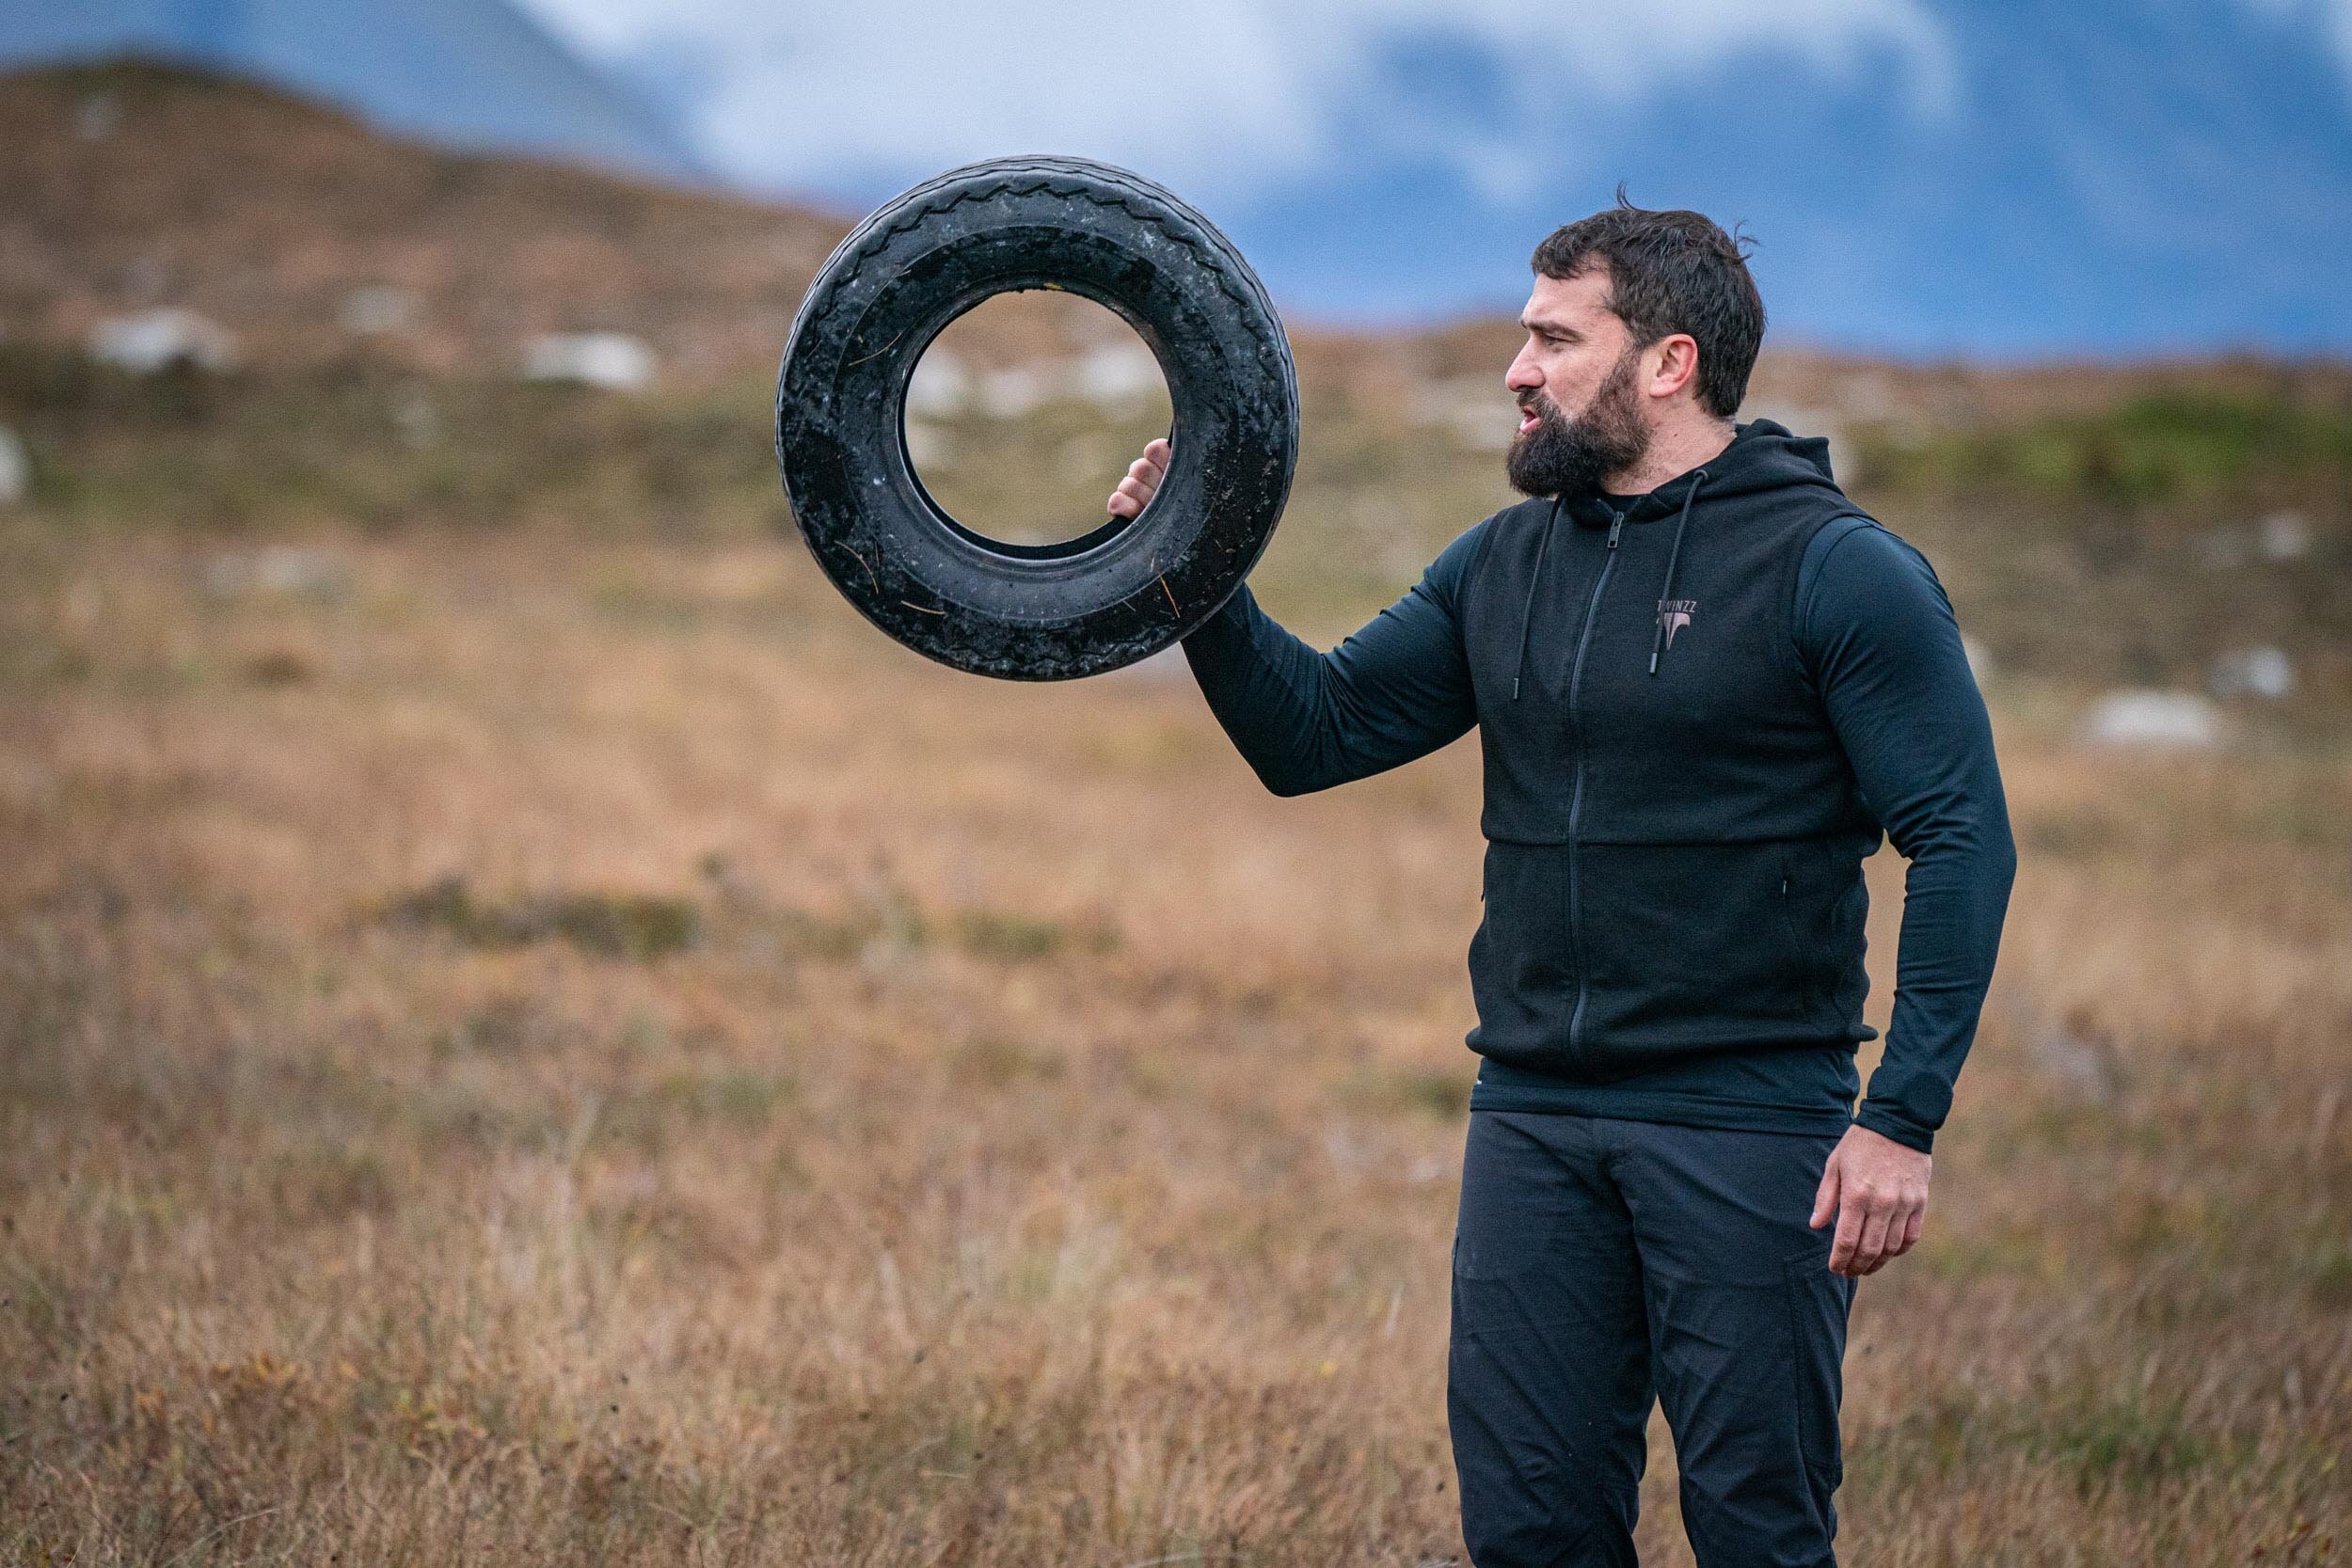  Chief Instructor Ant Middleton  Episode 2 - Murder Ball  Minnow Films / Channel 4 